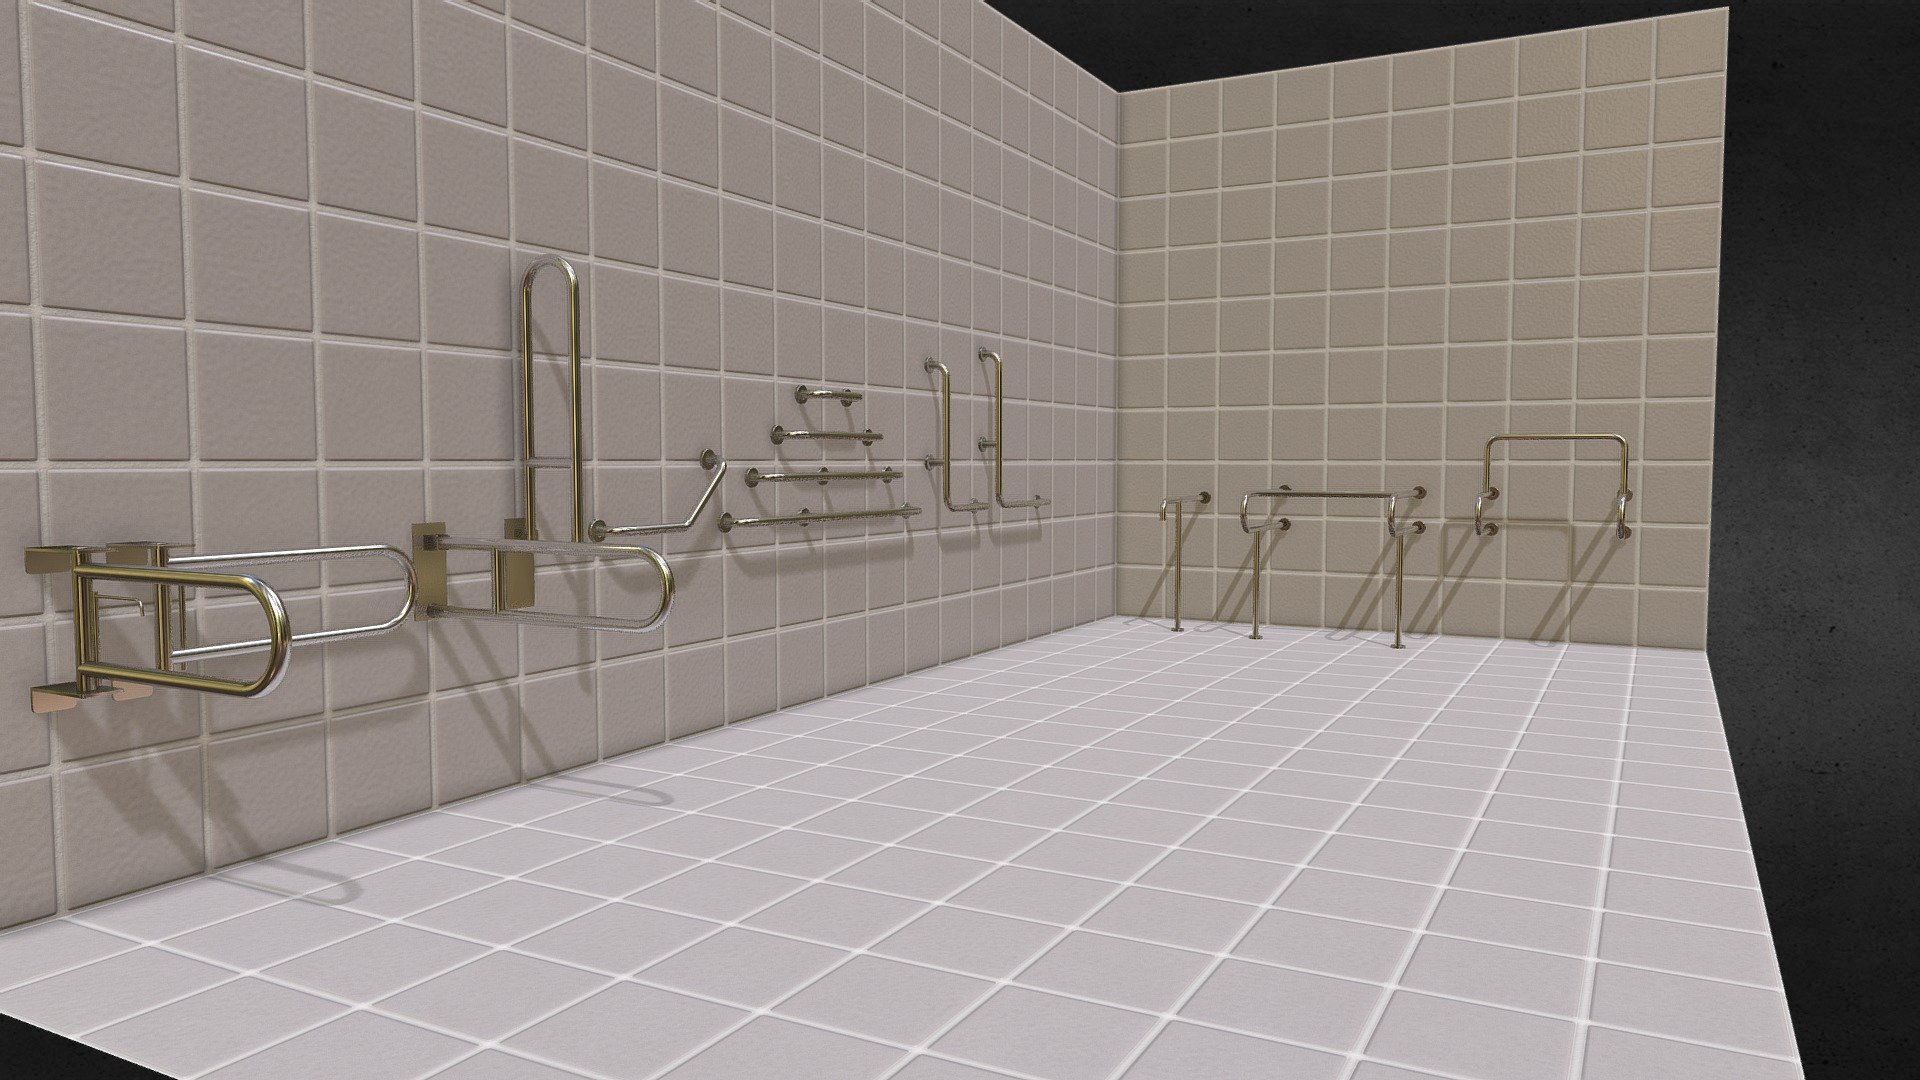 Bathroom accesories 3D model set For Architexture Visualization in realtime rendering that balance poly count with render output quality.

Pack include
- Handrail 30 cm.
- Handrail 60 cm.
- Handrail 90 cm.
- Handrail 120 cm.
- L Shape Handrail 60x40 cm.
- L Shape Handrail 70x60 cm.
- V Shape Handrail 30x30 cm.
- Basin Handrail 74x80 cm.
- Basin Handrail 74x70x80 cm.
- Urinal Handrail 40x60x55 cm.
- T Shape Handrail 70x70 cm.
- Foldable Support Arm 
- Swing Handrail

File Format
- FBX
- DAE
- OBJ
- STL - Bathroom Safety Accessories Pack 01 - Buy Royalty Free 3D model by IkQ 3d model